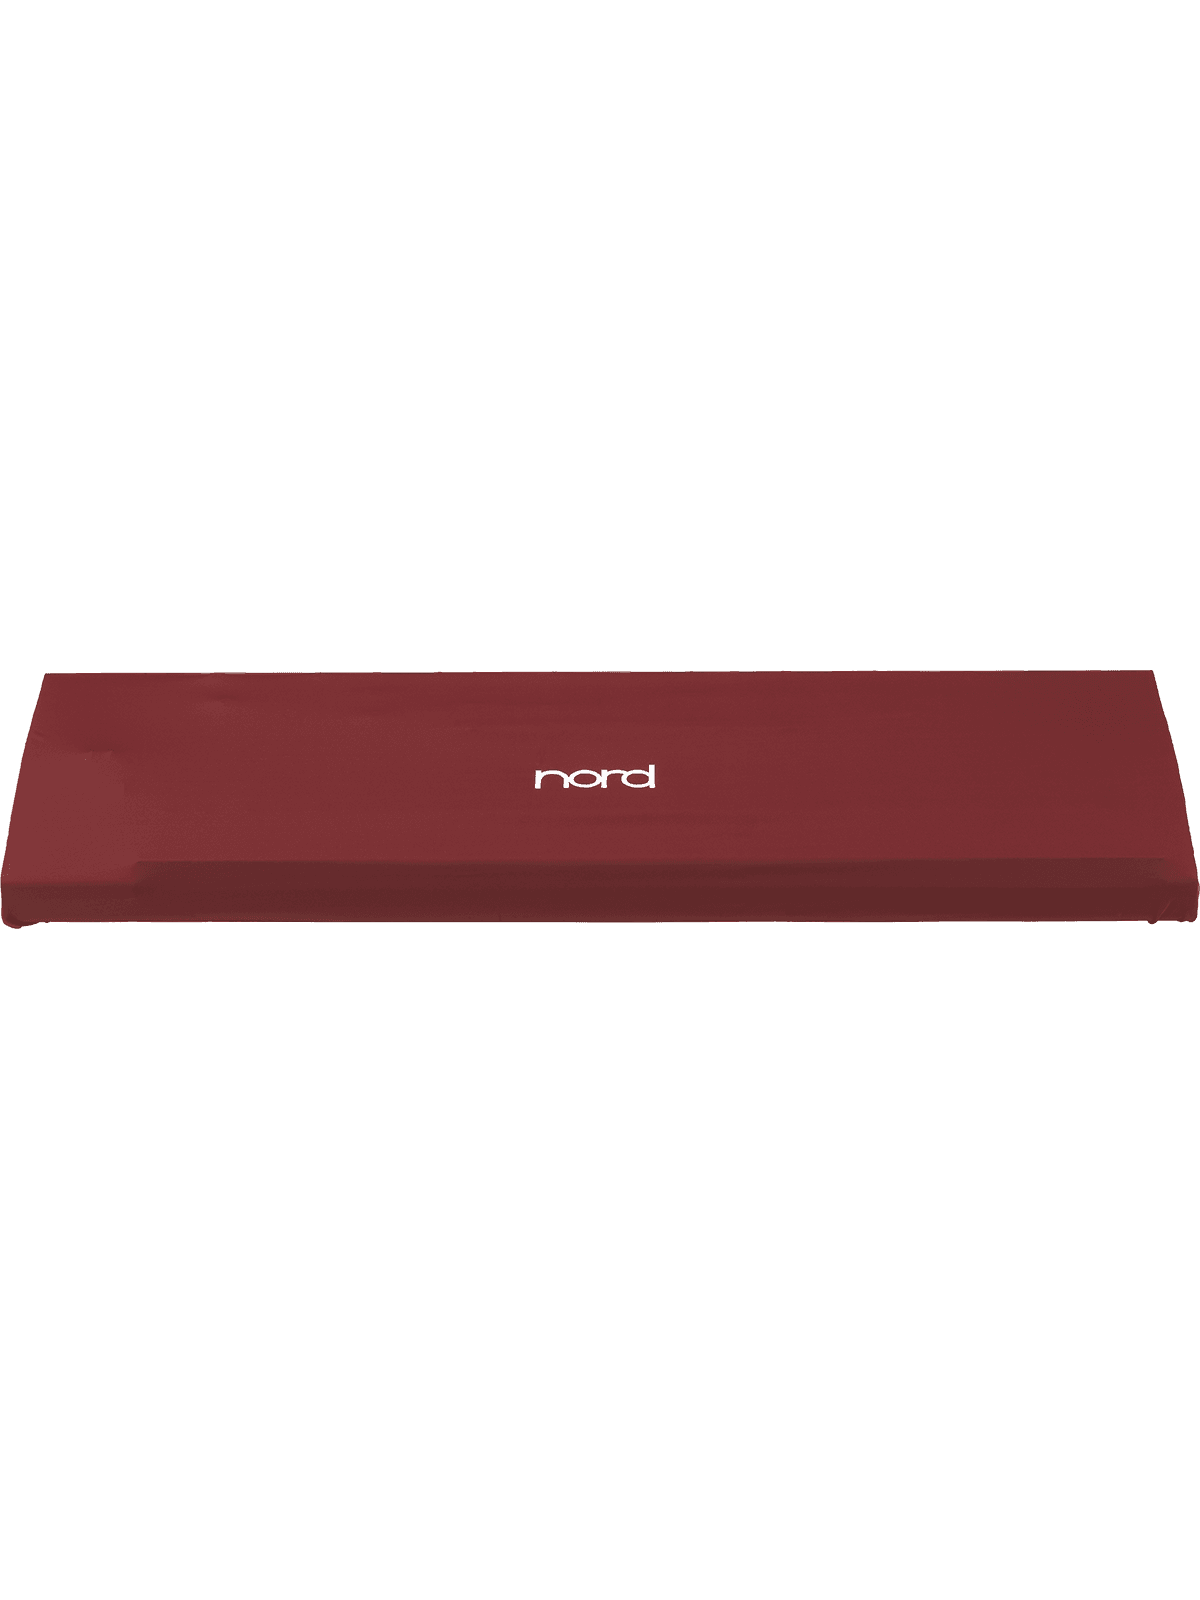 Nord DUSTCOVER73-V2